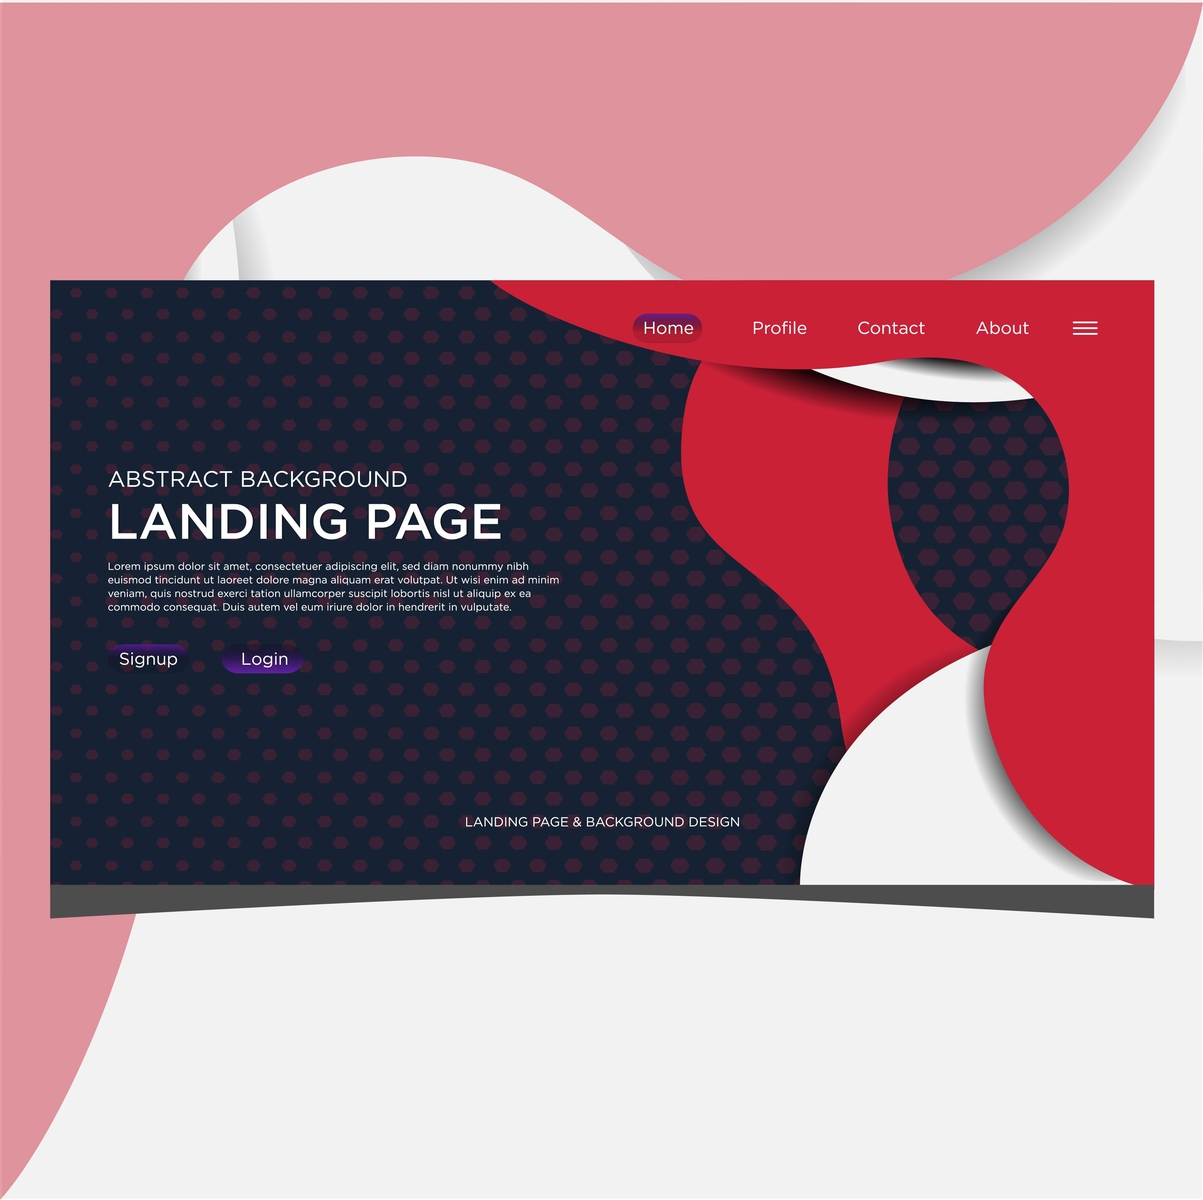 abstract landing page website background by sulismartin on Dribbble